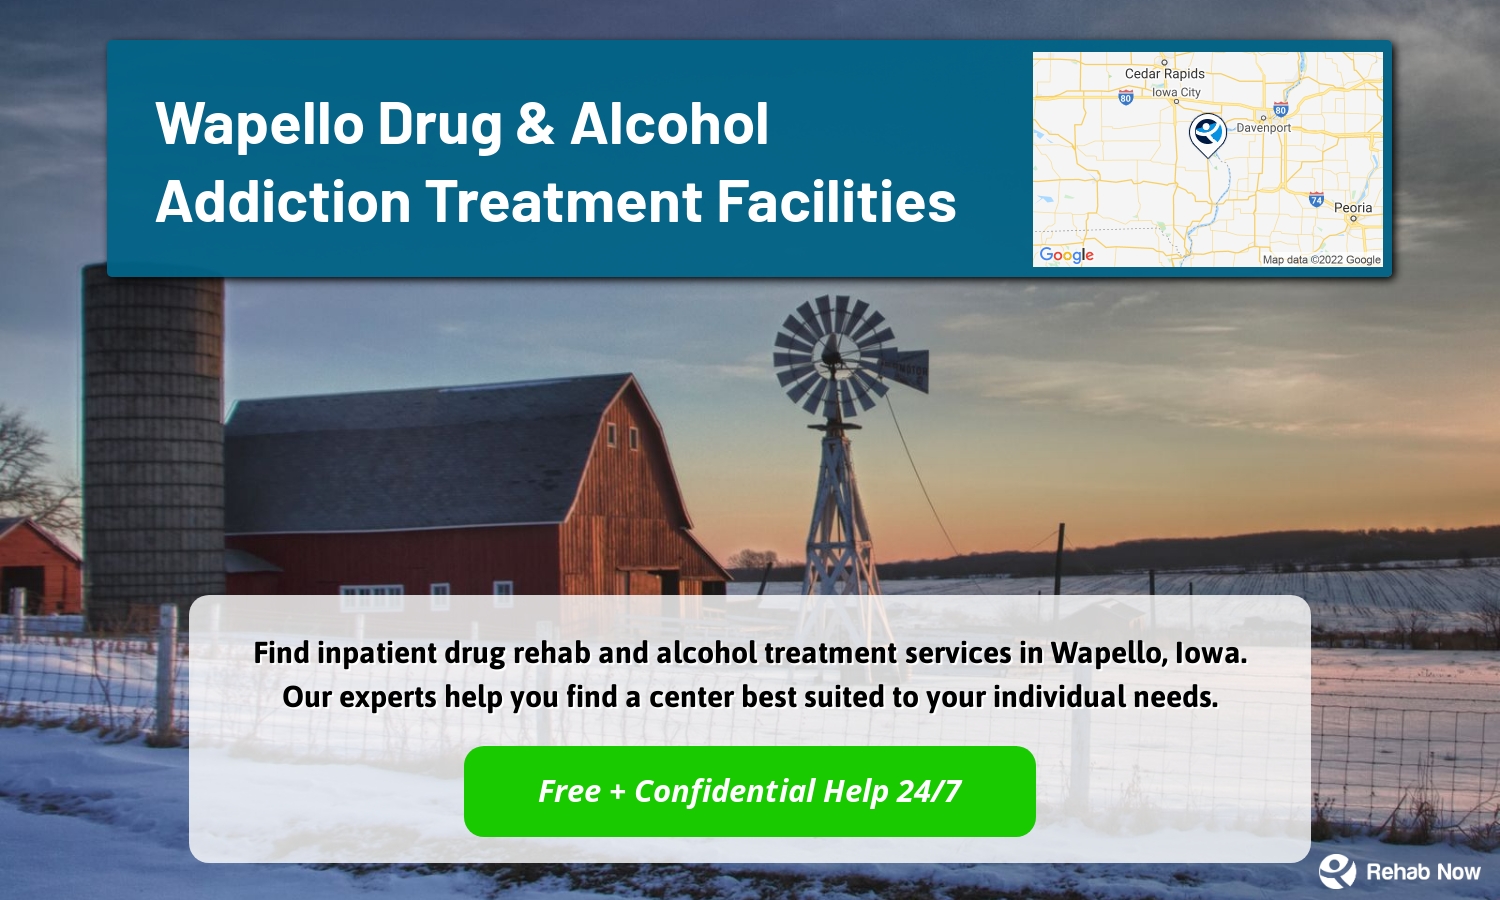 Find inpatient drug rehab and alcohol treatment services in Wapello, Iowa. Our experts help you find a center best suited to your individual needs.